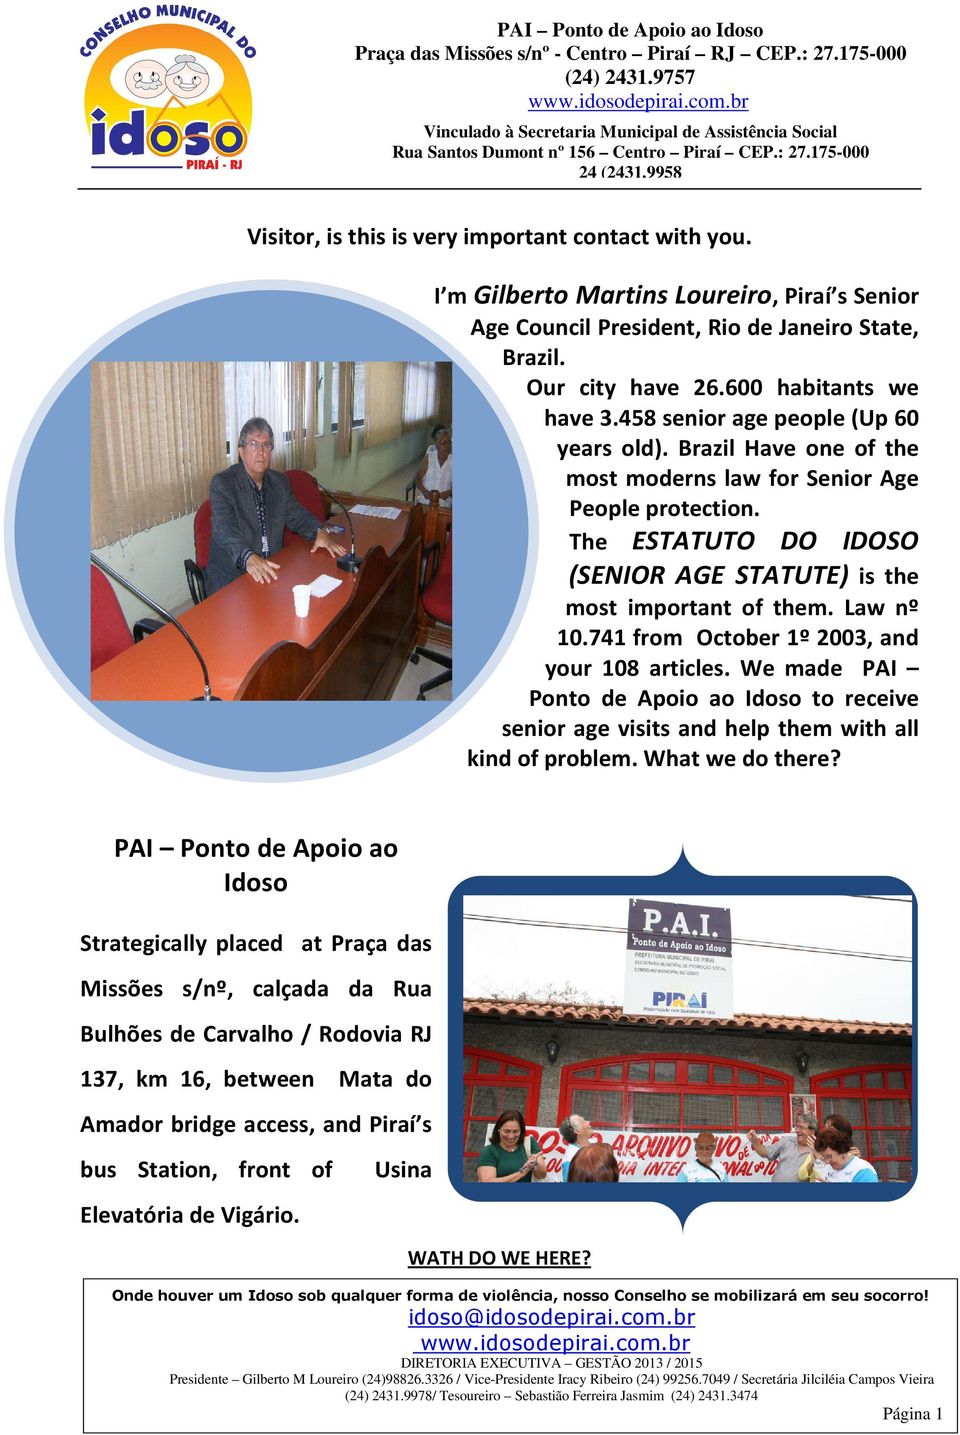 741 from October 1º 2003, and your 108 articles. We made PAI Ponto de Apoio ao Idoso to receive senior age visits and help them with all kind of problem. What we do there?